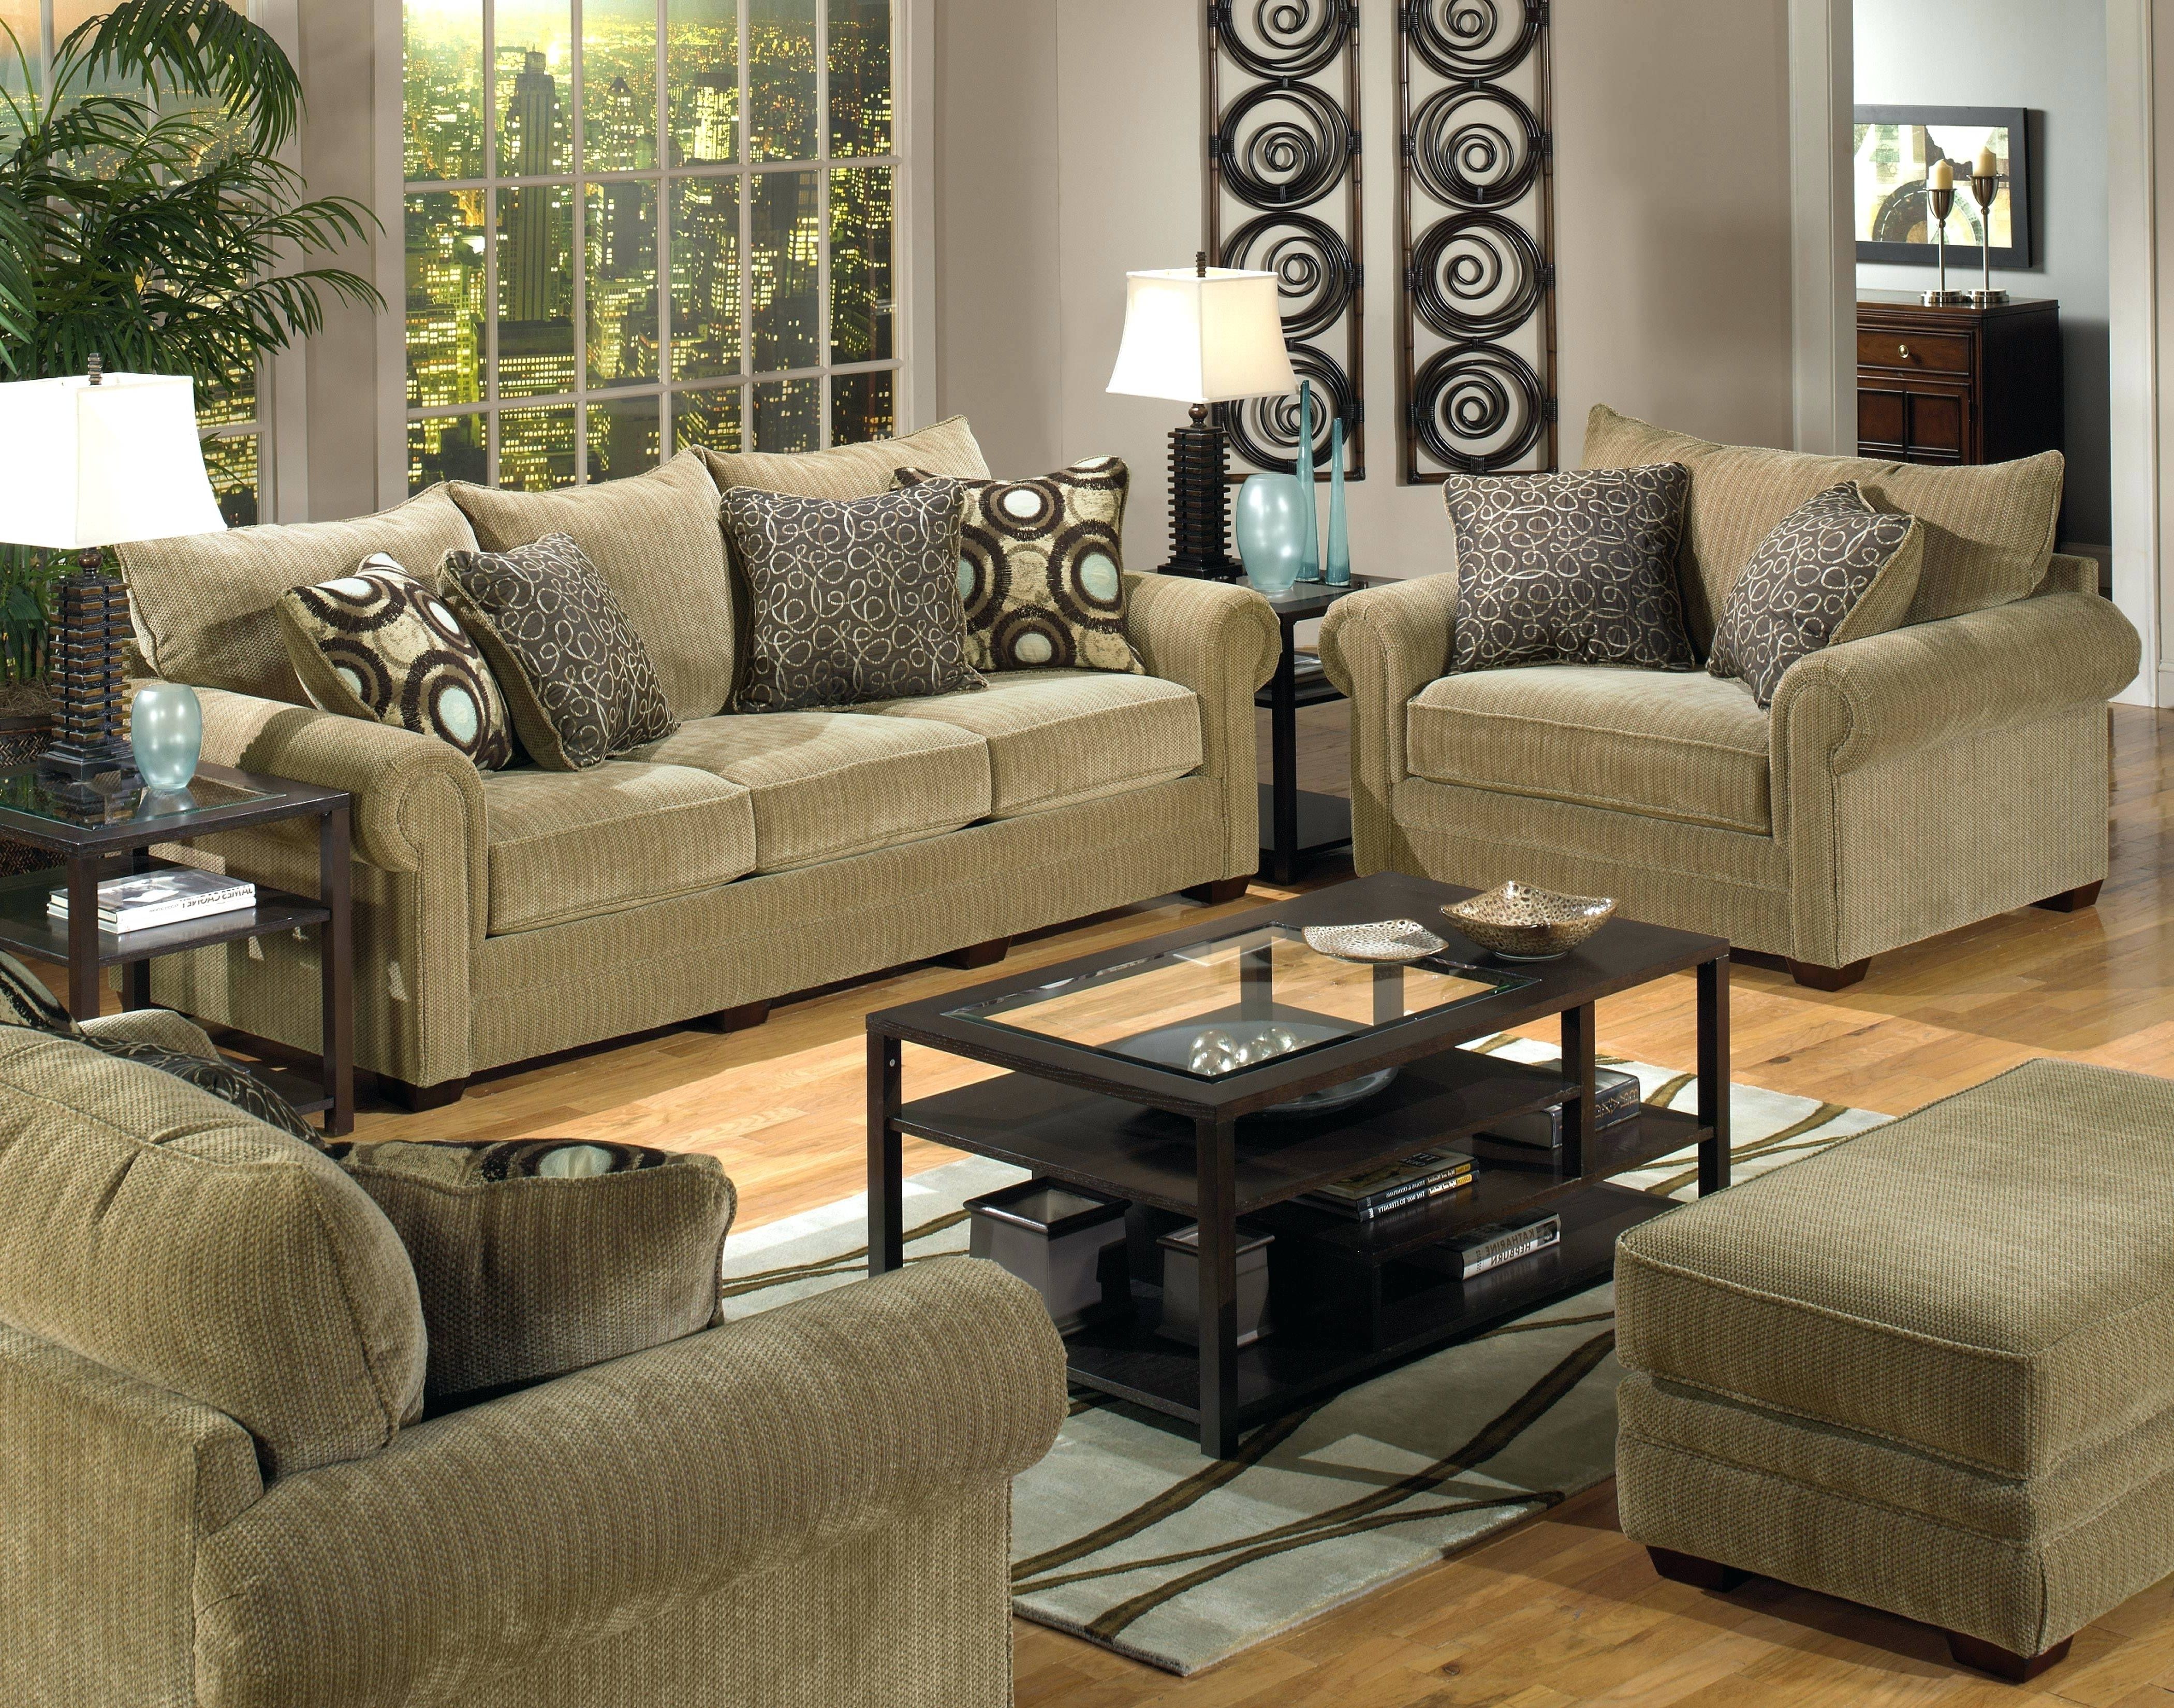 Newest Cream Colored Sofas In Cream Colored Sofa Throw Pillows Covers Microfiber (Photo 9 of 15)